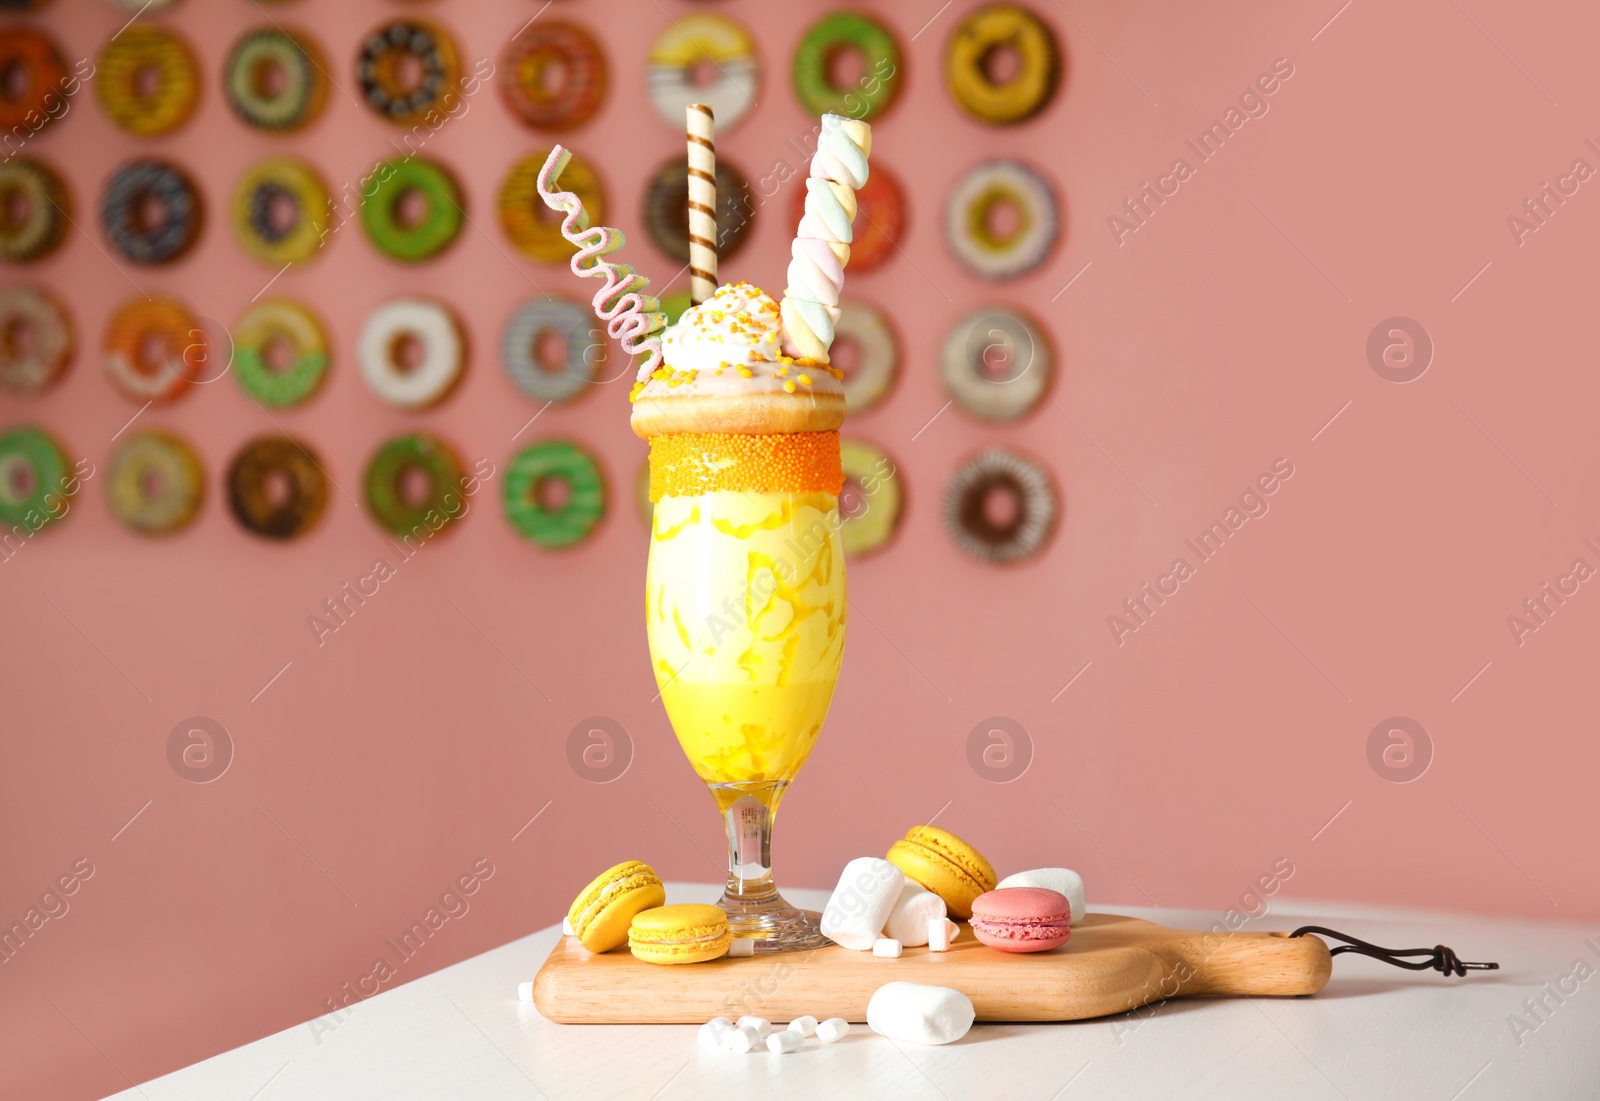 Photo of Tasty milk shake with sweets in glass and macarons served on table indoors